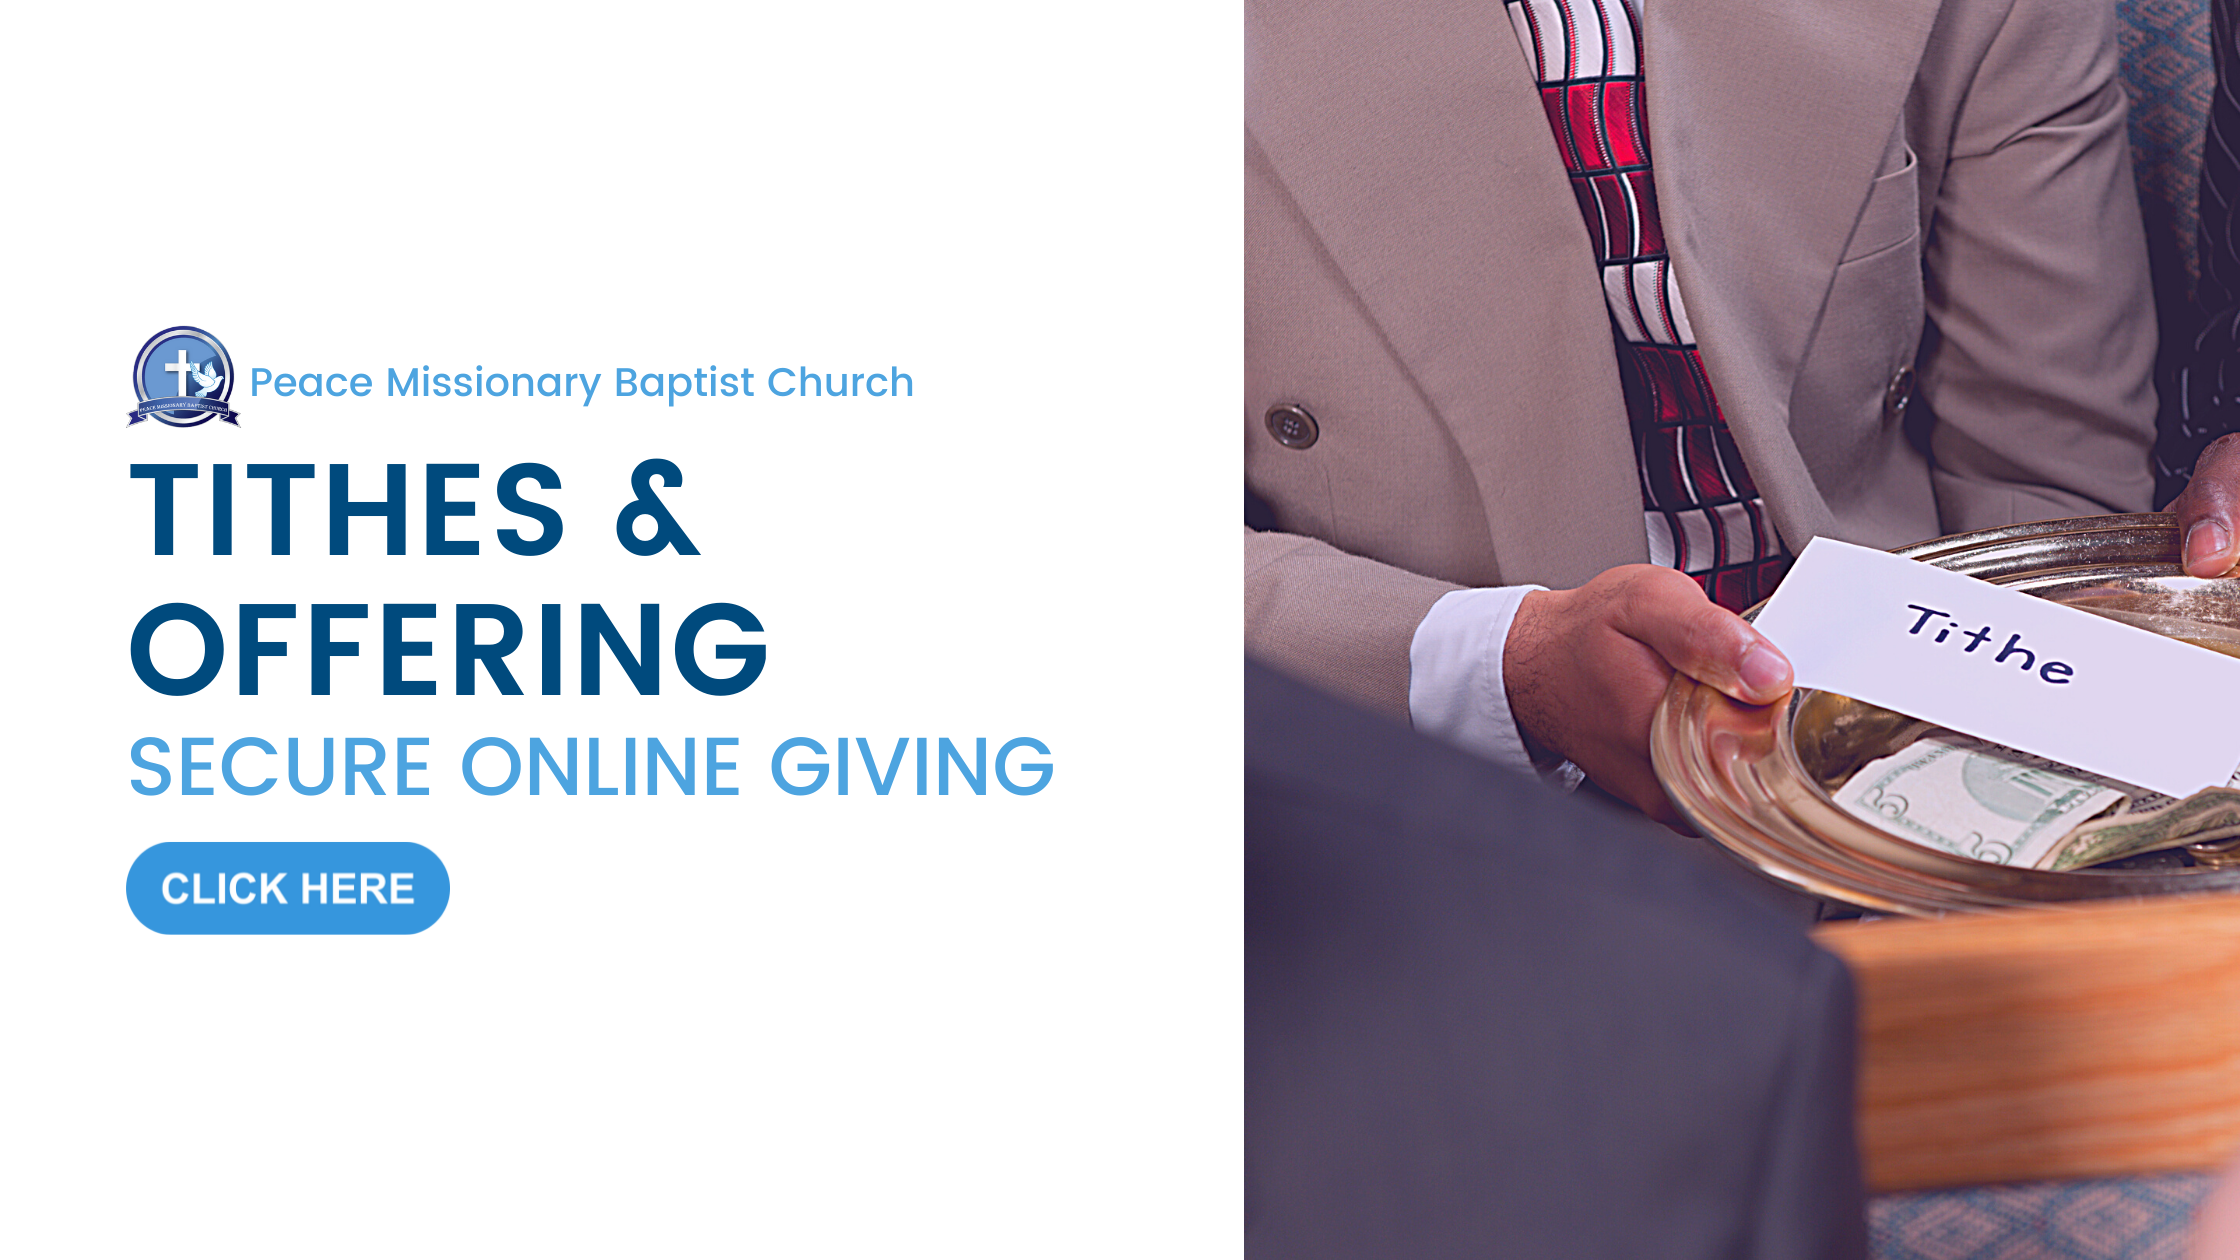 TITHES AND OFFERING